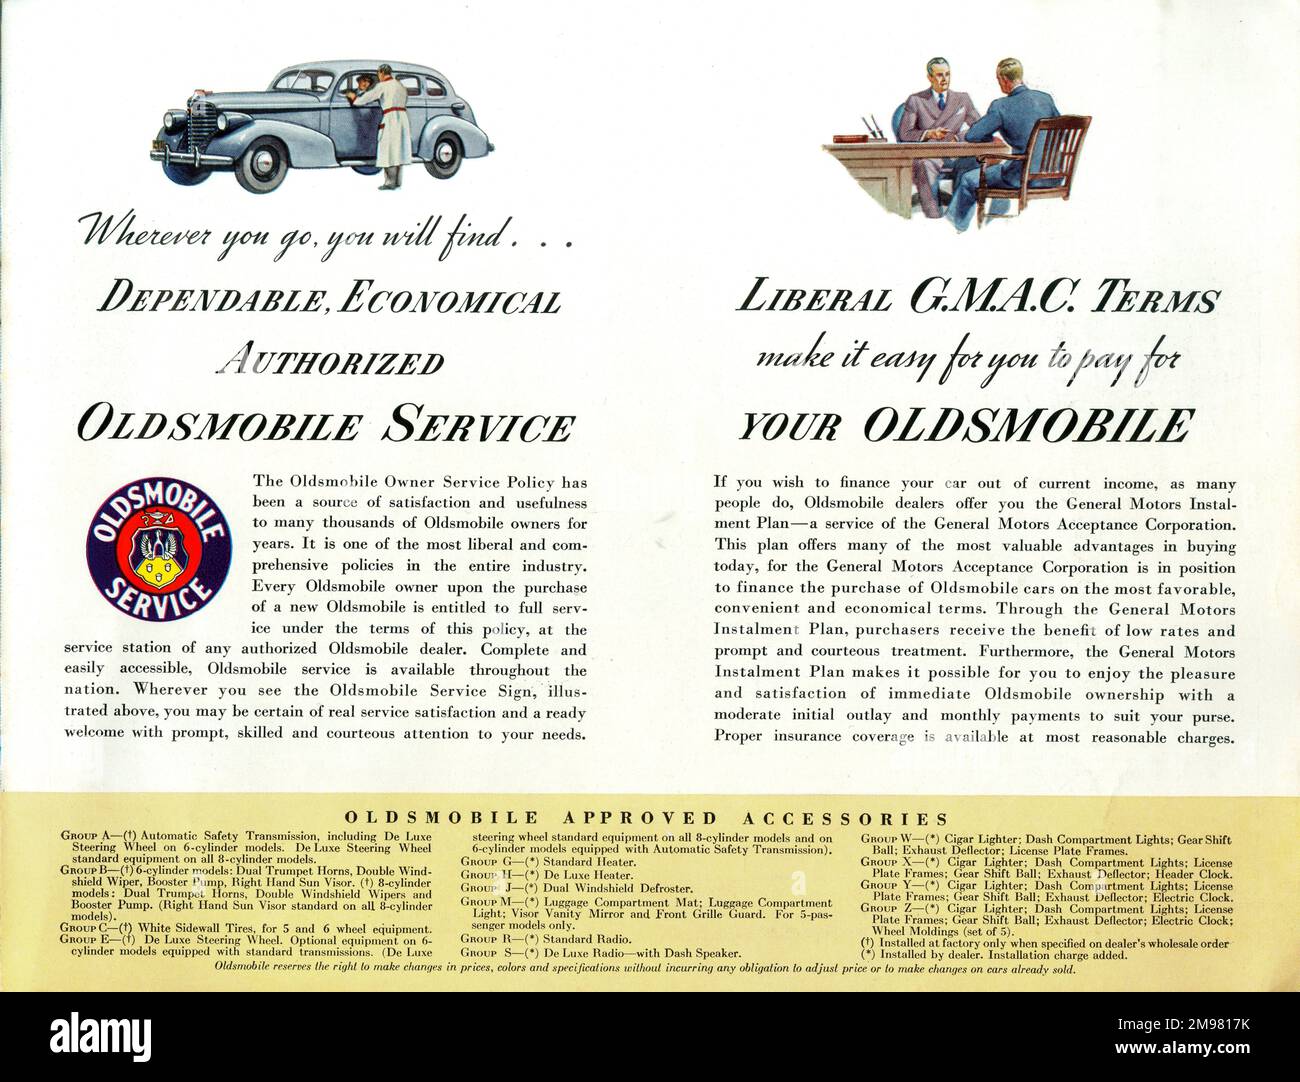 Brochure page, Oldsmobile cars, giving details of service, payment terms and approved accessories. Stock Photo